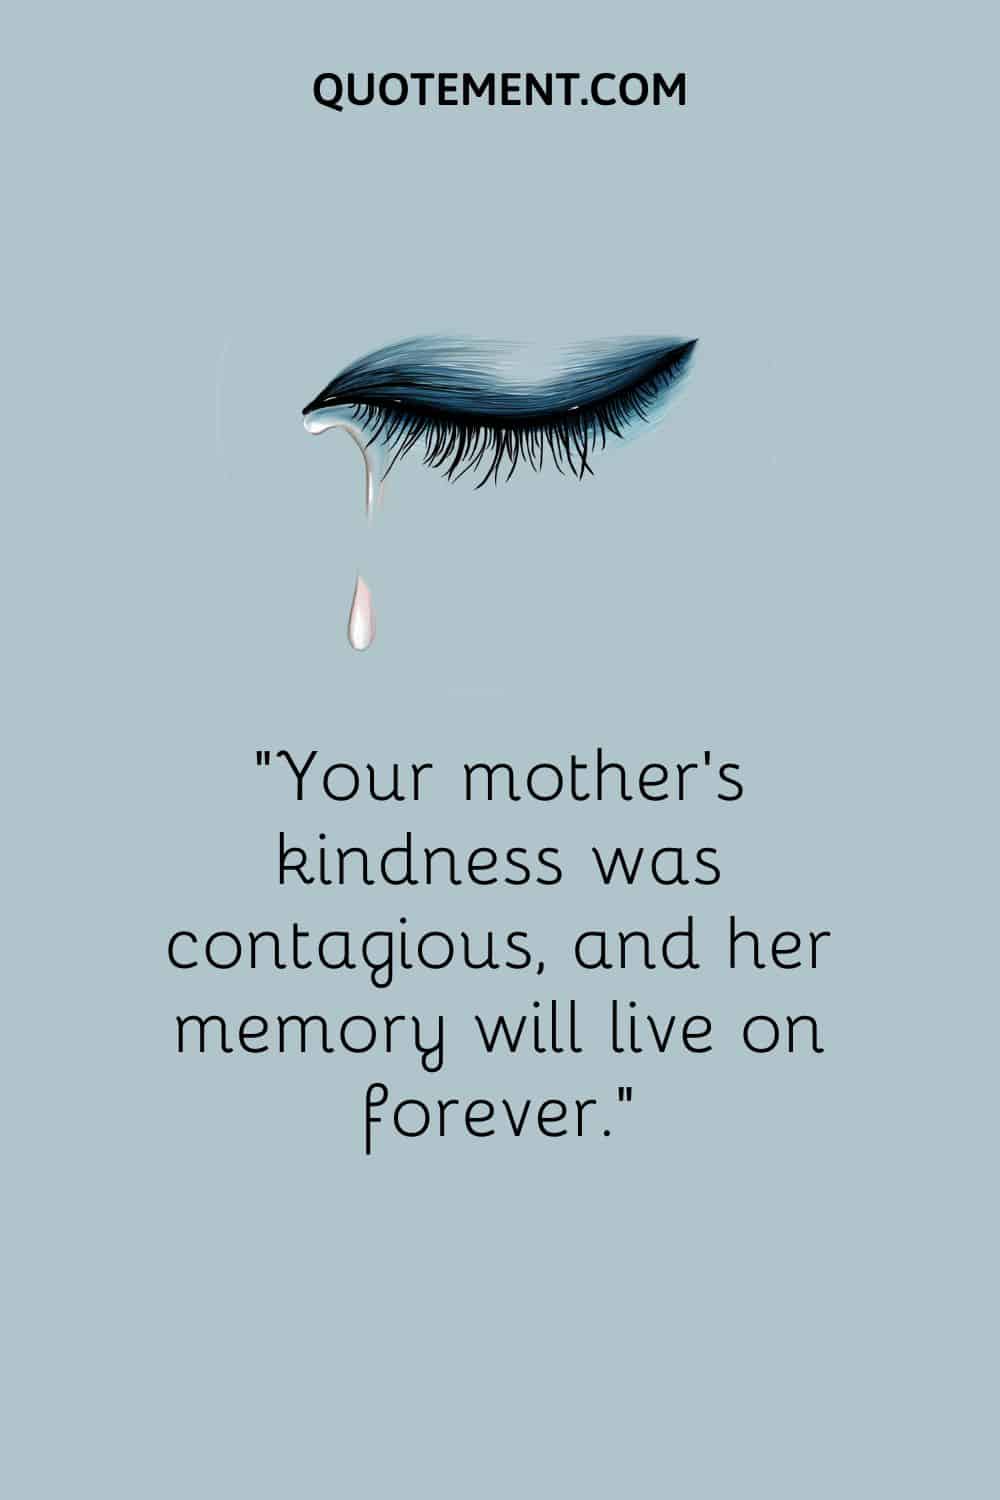 eye dropping a tear image representing short mother condolence message
